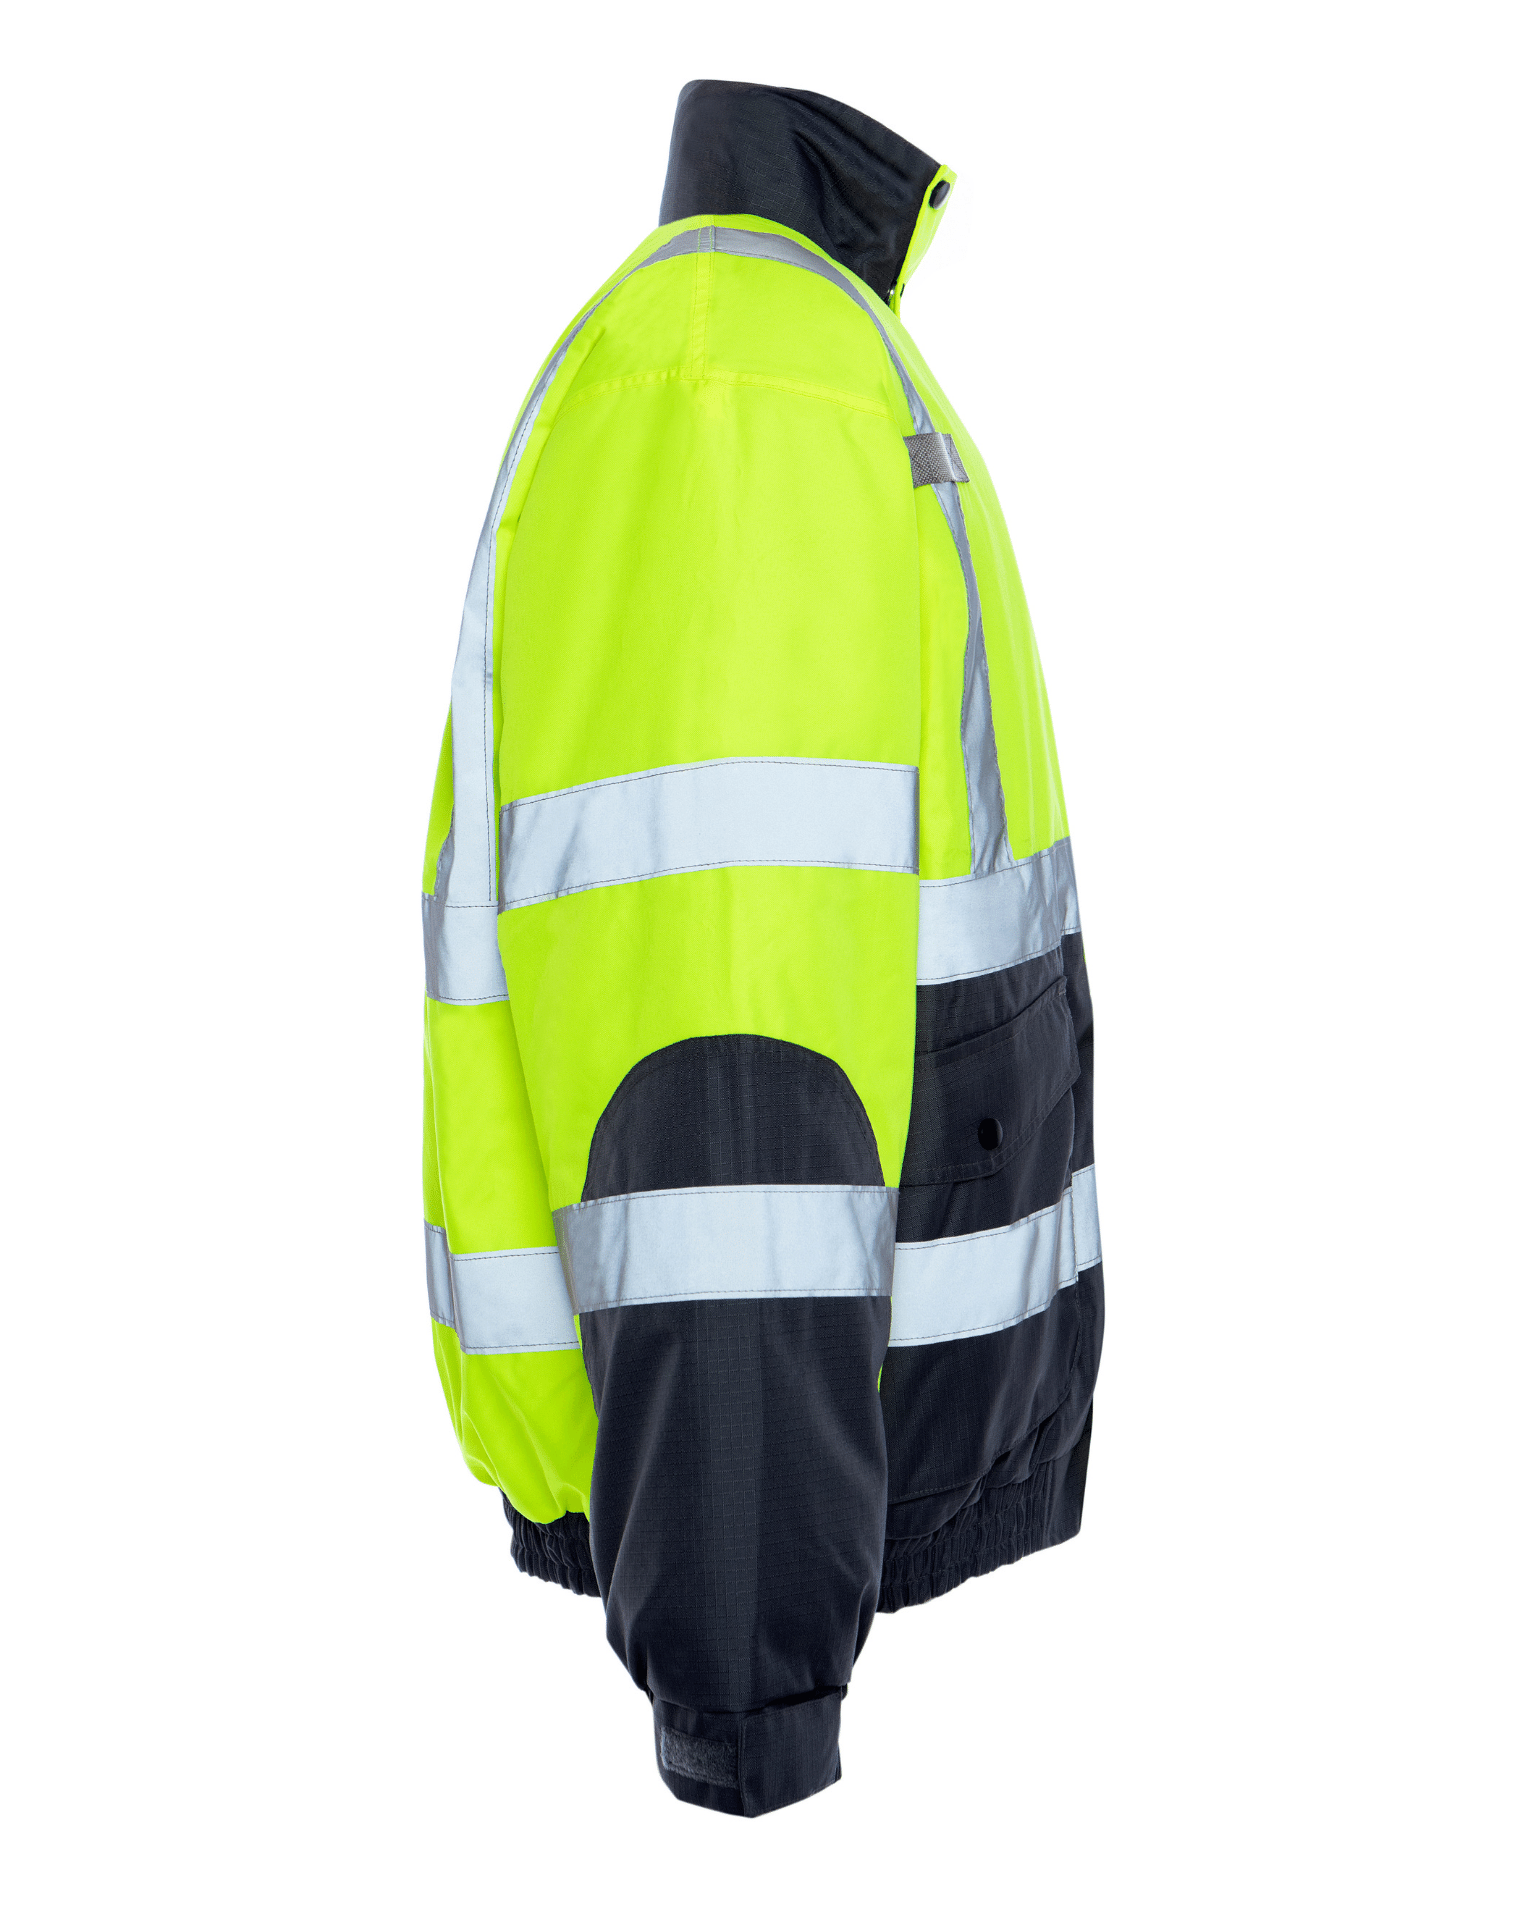 ANSI Class 3 High Visibility removable heat-reflective lining abraision-resistant inserts liquid and stain repellency 3-in-1 jacket by Utility Pro